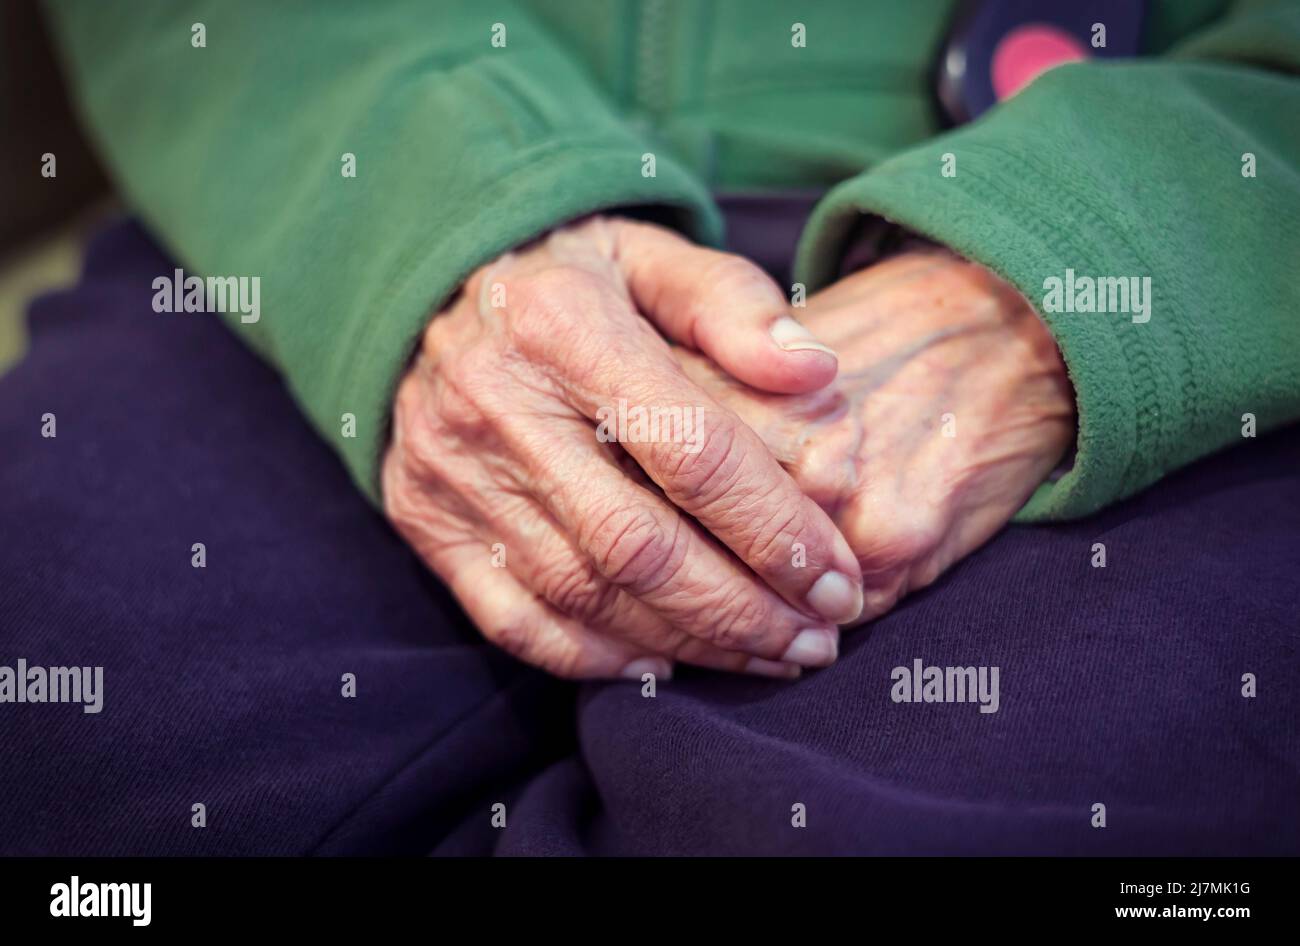 Close-up of the hands of an old Asian Indian woman with wrinkled skin. Depicts loneliness, worry, dementia, and mental health concepts. Stock Photo